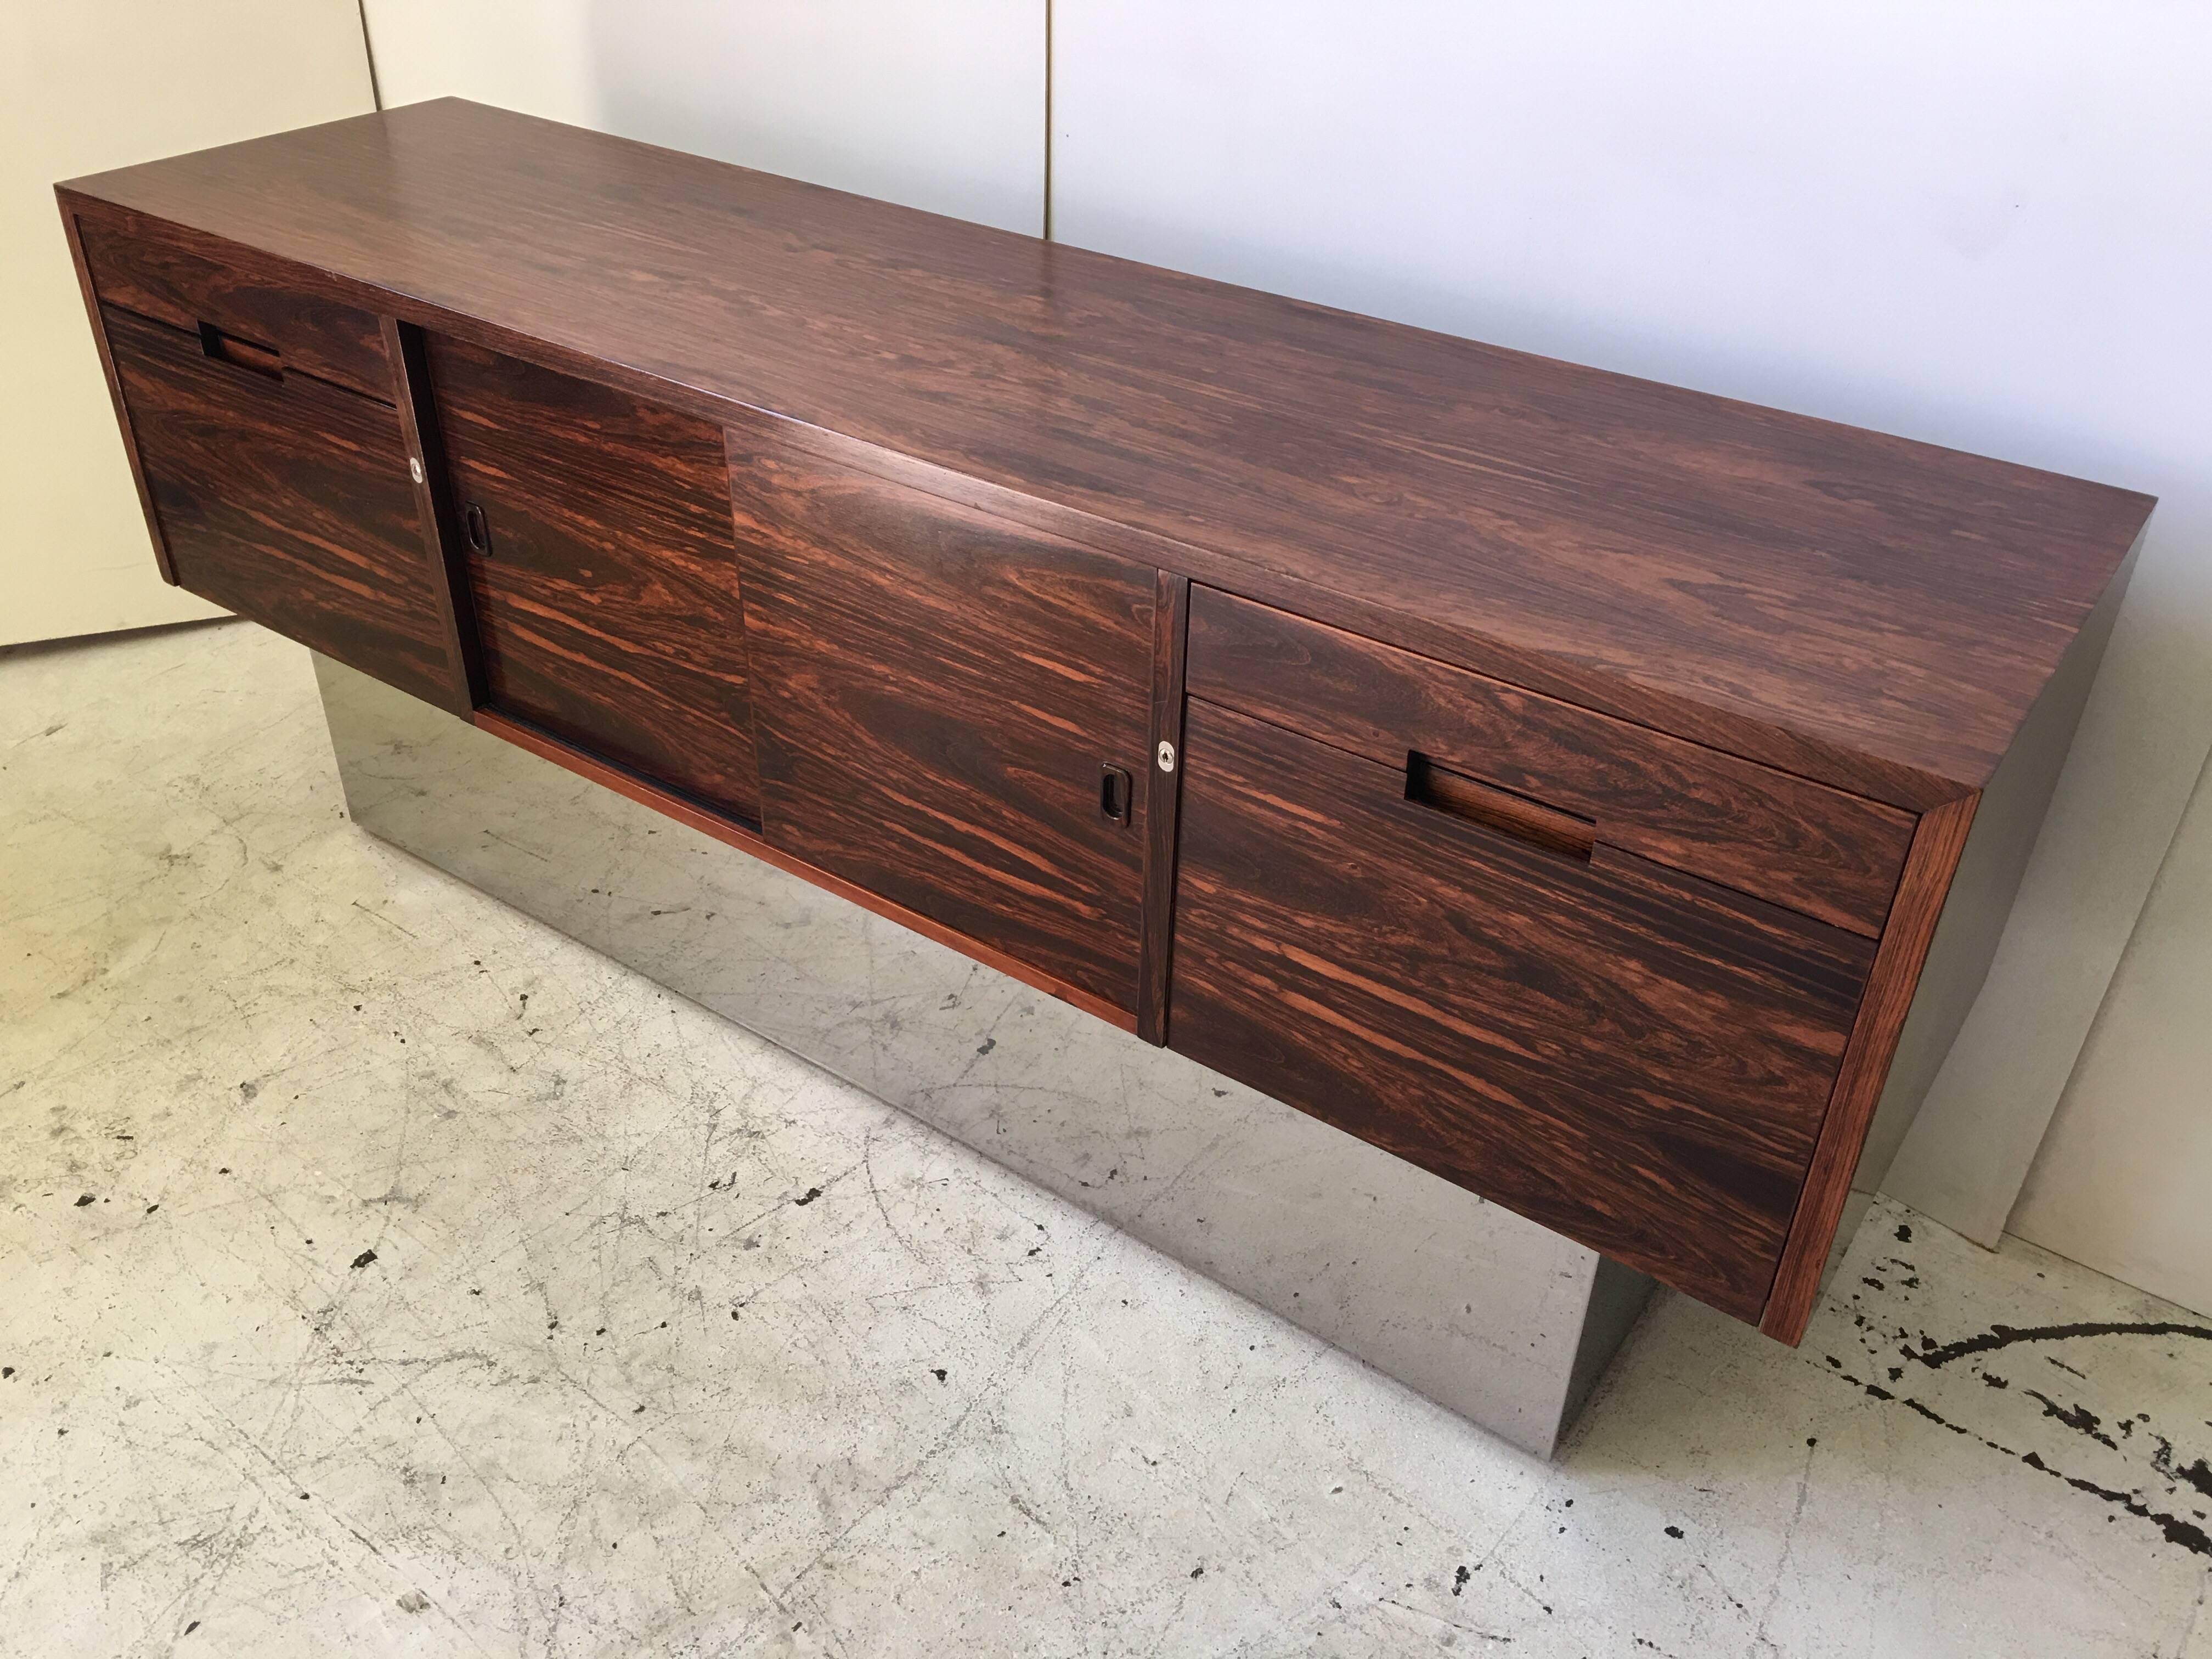 This is an absolutely stunning credenza. It has a figural Brazilian rosewood grain, and effortlessly floats atop a chromed steel box base. It is a vintage piece from circa 1970, attr. to the Pace Collection. Although it resembles many Milo Baughman